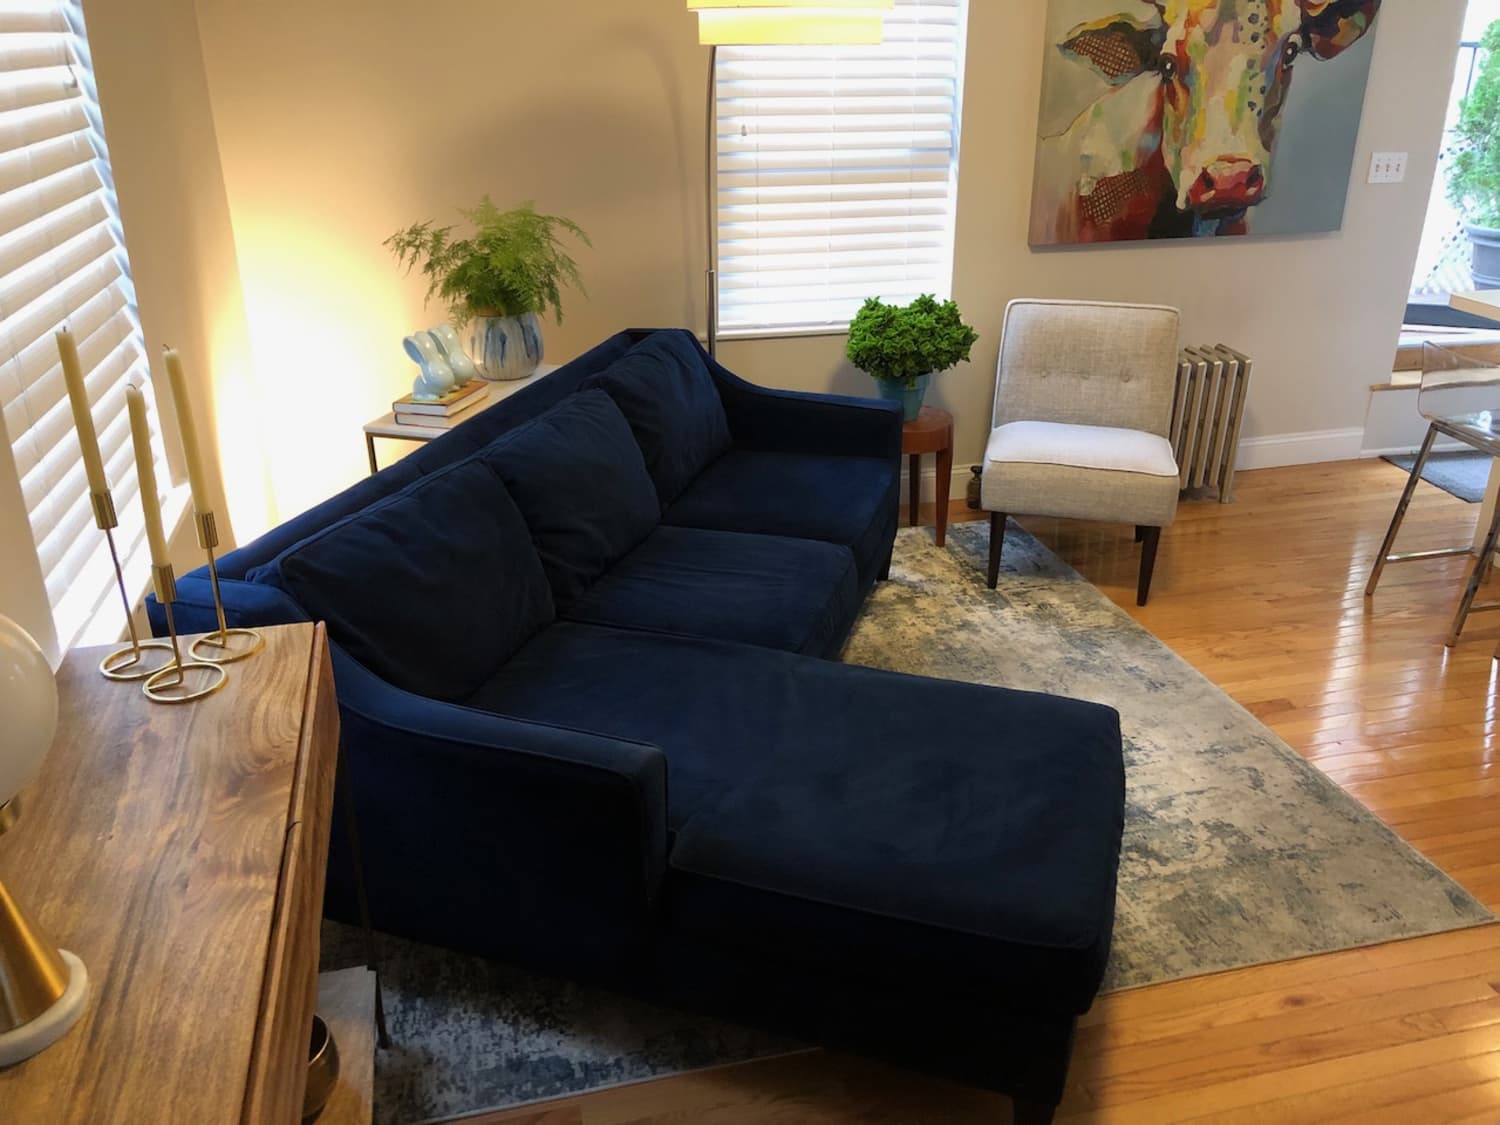 West Elm Sectional Sofa Blue Velvet - Apartment Therapy's ...